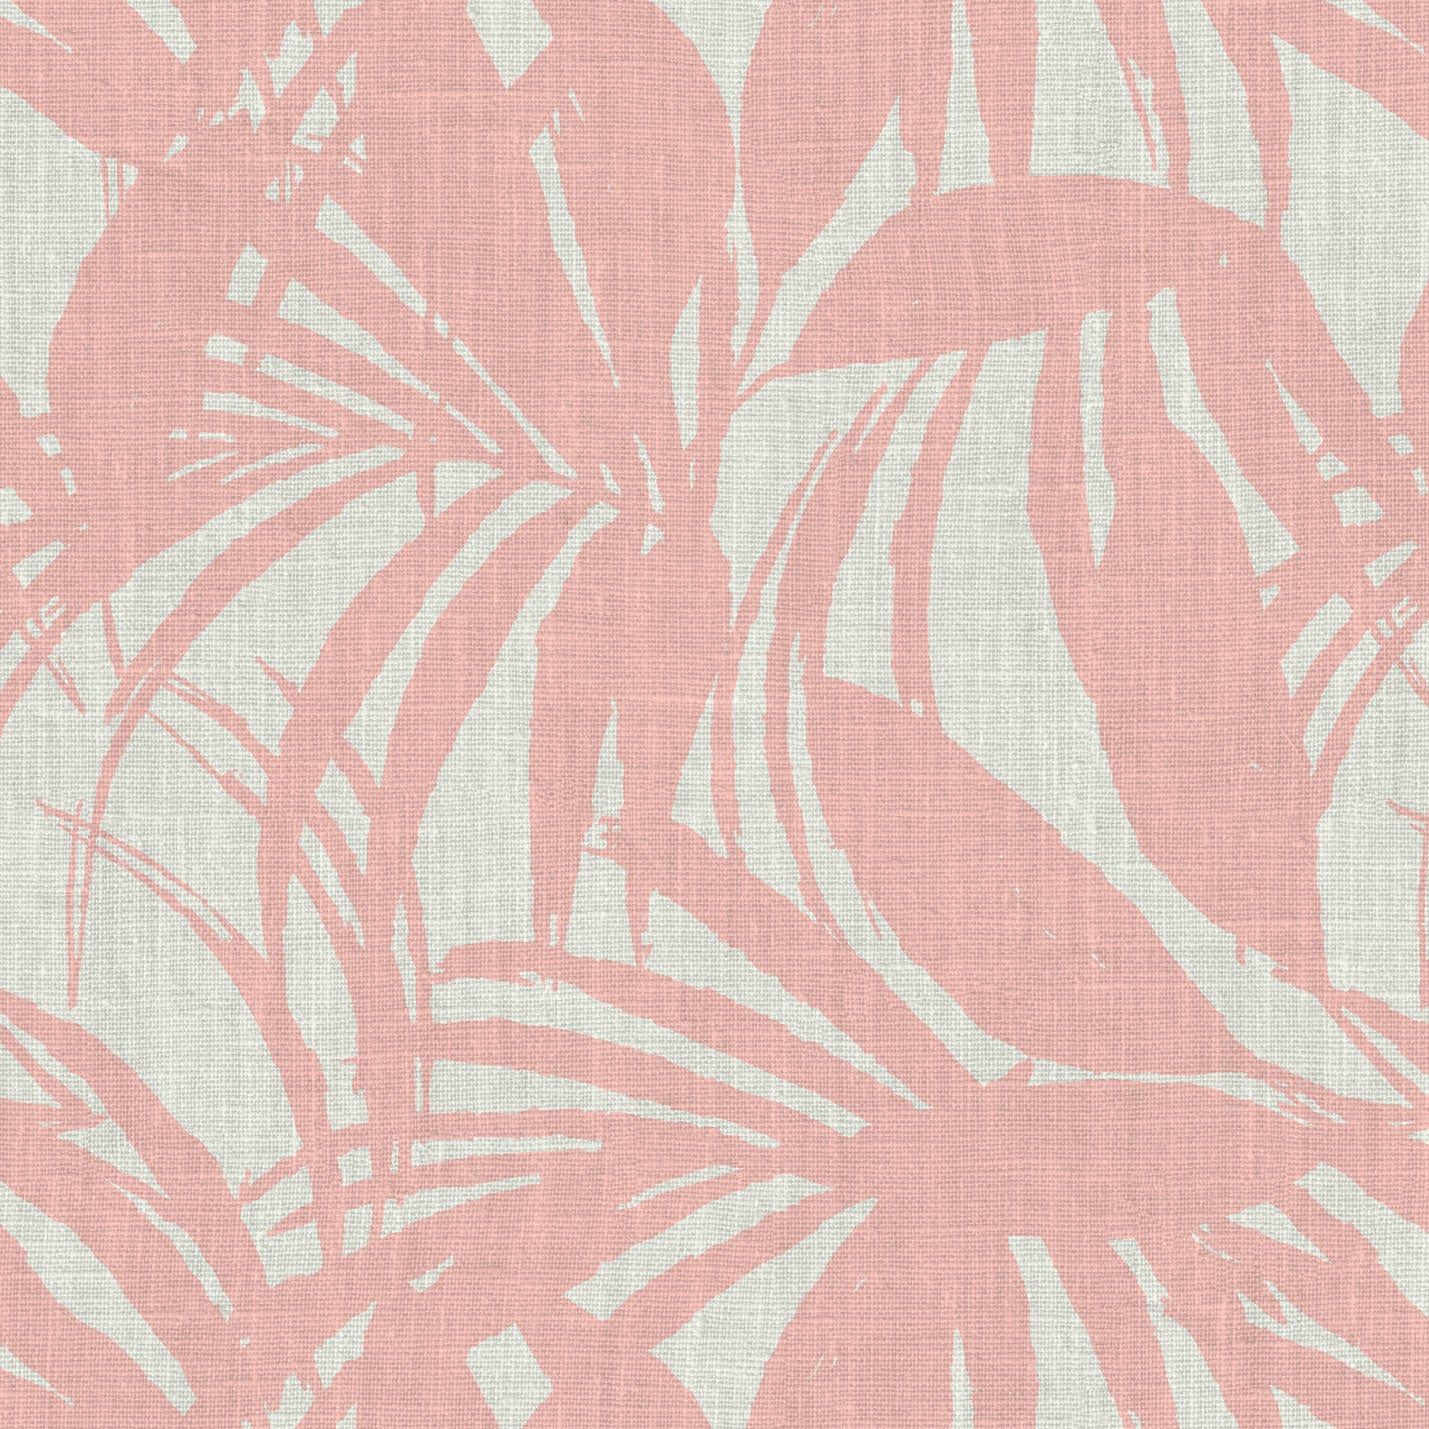 wallpaper oversize tropical leaf Natural Textured Eco-Friendly Non-toxic High-quality Sustainable practices Sustainability Interior Design Wall covering Bold retro chic custom jungle garden botanical Seaside Coastal Seashore Waterfront Vacation home styling Retreat Relaxed beach vibes Beach cottage Shoreline Oceanfront white peach pink coral pastel baby orange linen